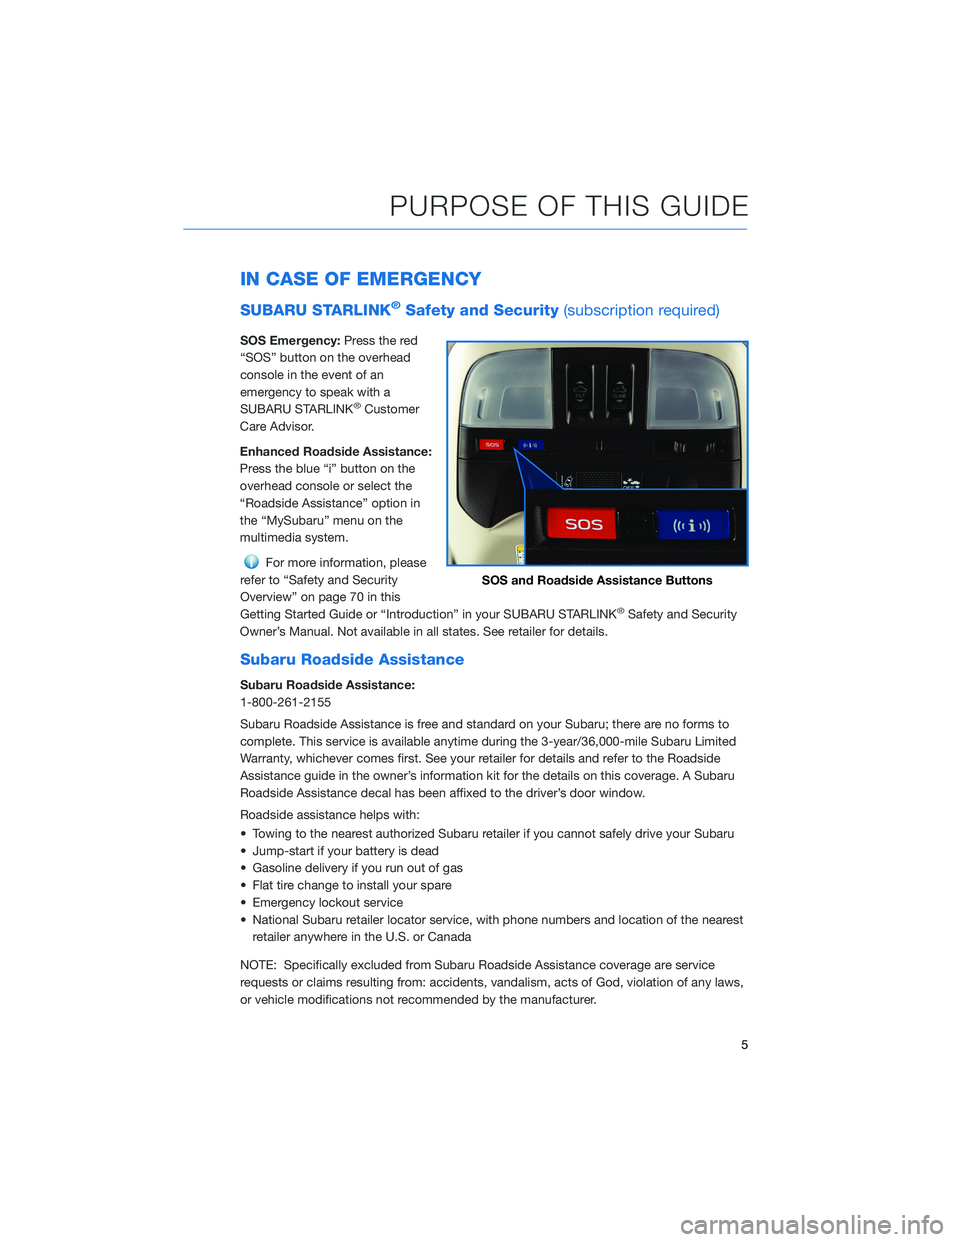 SUBARU CROSSTREK 2022  Getting Started Guide IN CASE OF EMERGENCY
SUBARU STARLINK®Safety and Security(subscription required)
SOS Emergency:Press the red
“SOS” button on the overhead
console in the event of an
emergency to speak with a
SUBAR